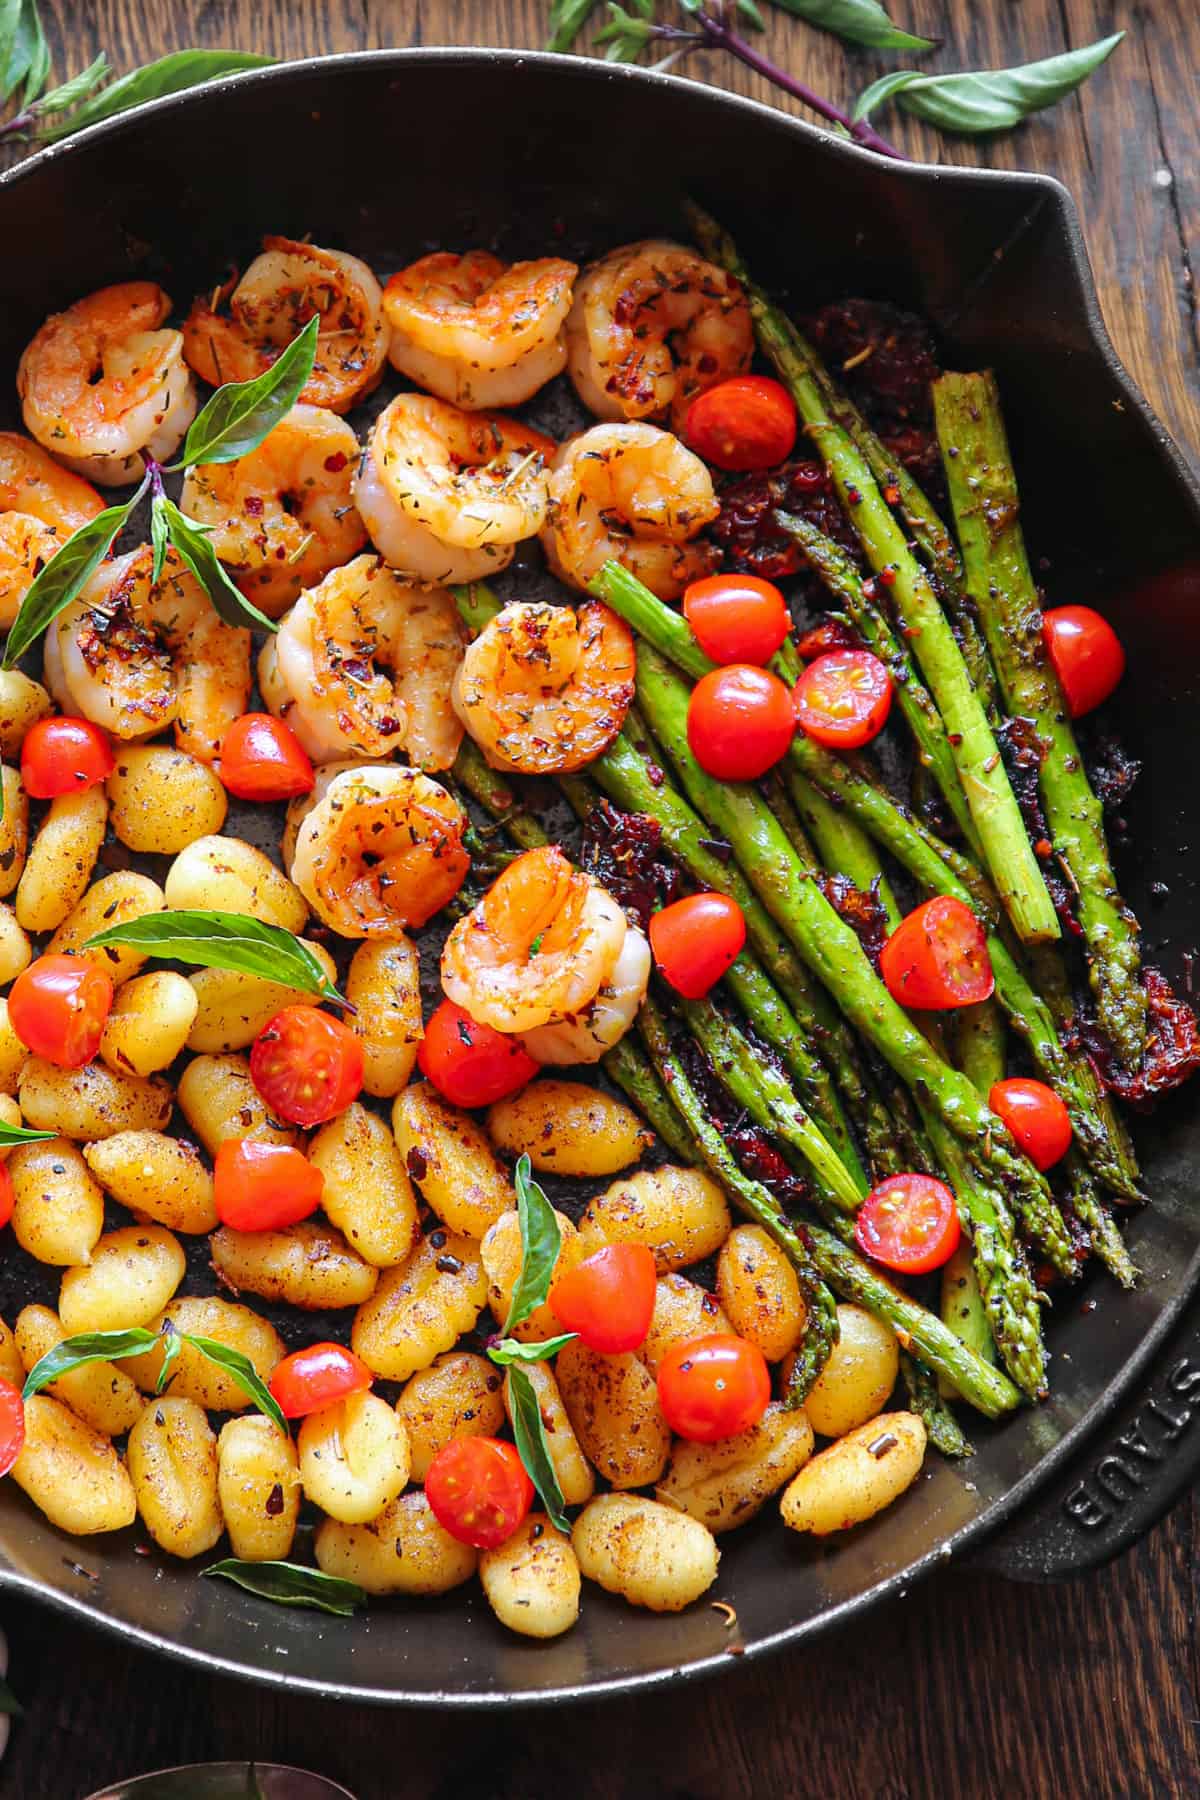 Shrimp Gnocchi with Asparagus, Sun-Dried Tomatoes, Cherry Tomatoes - in a cast iron skillet.